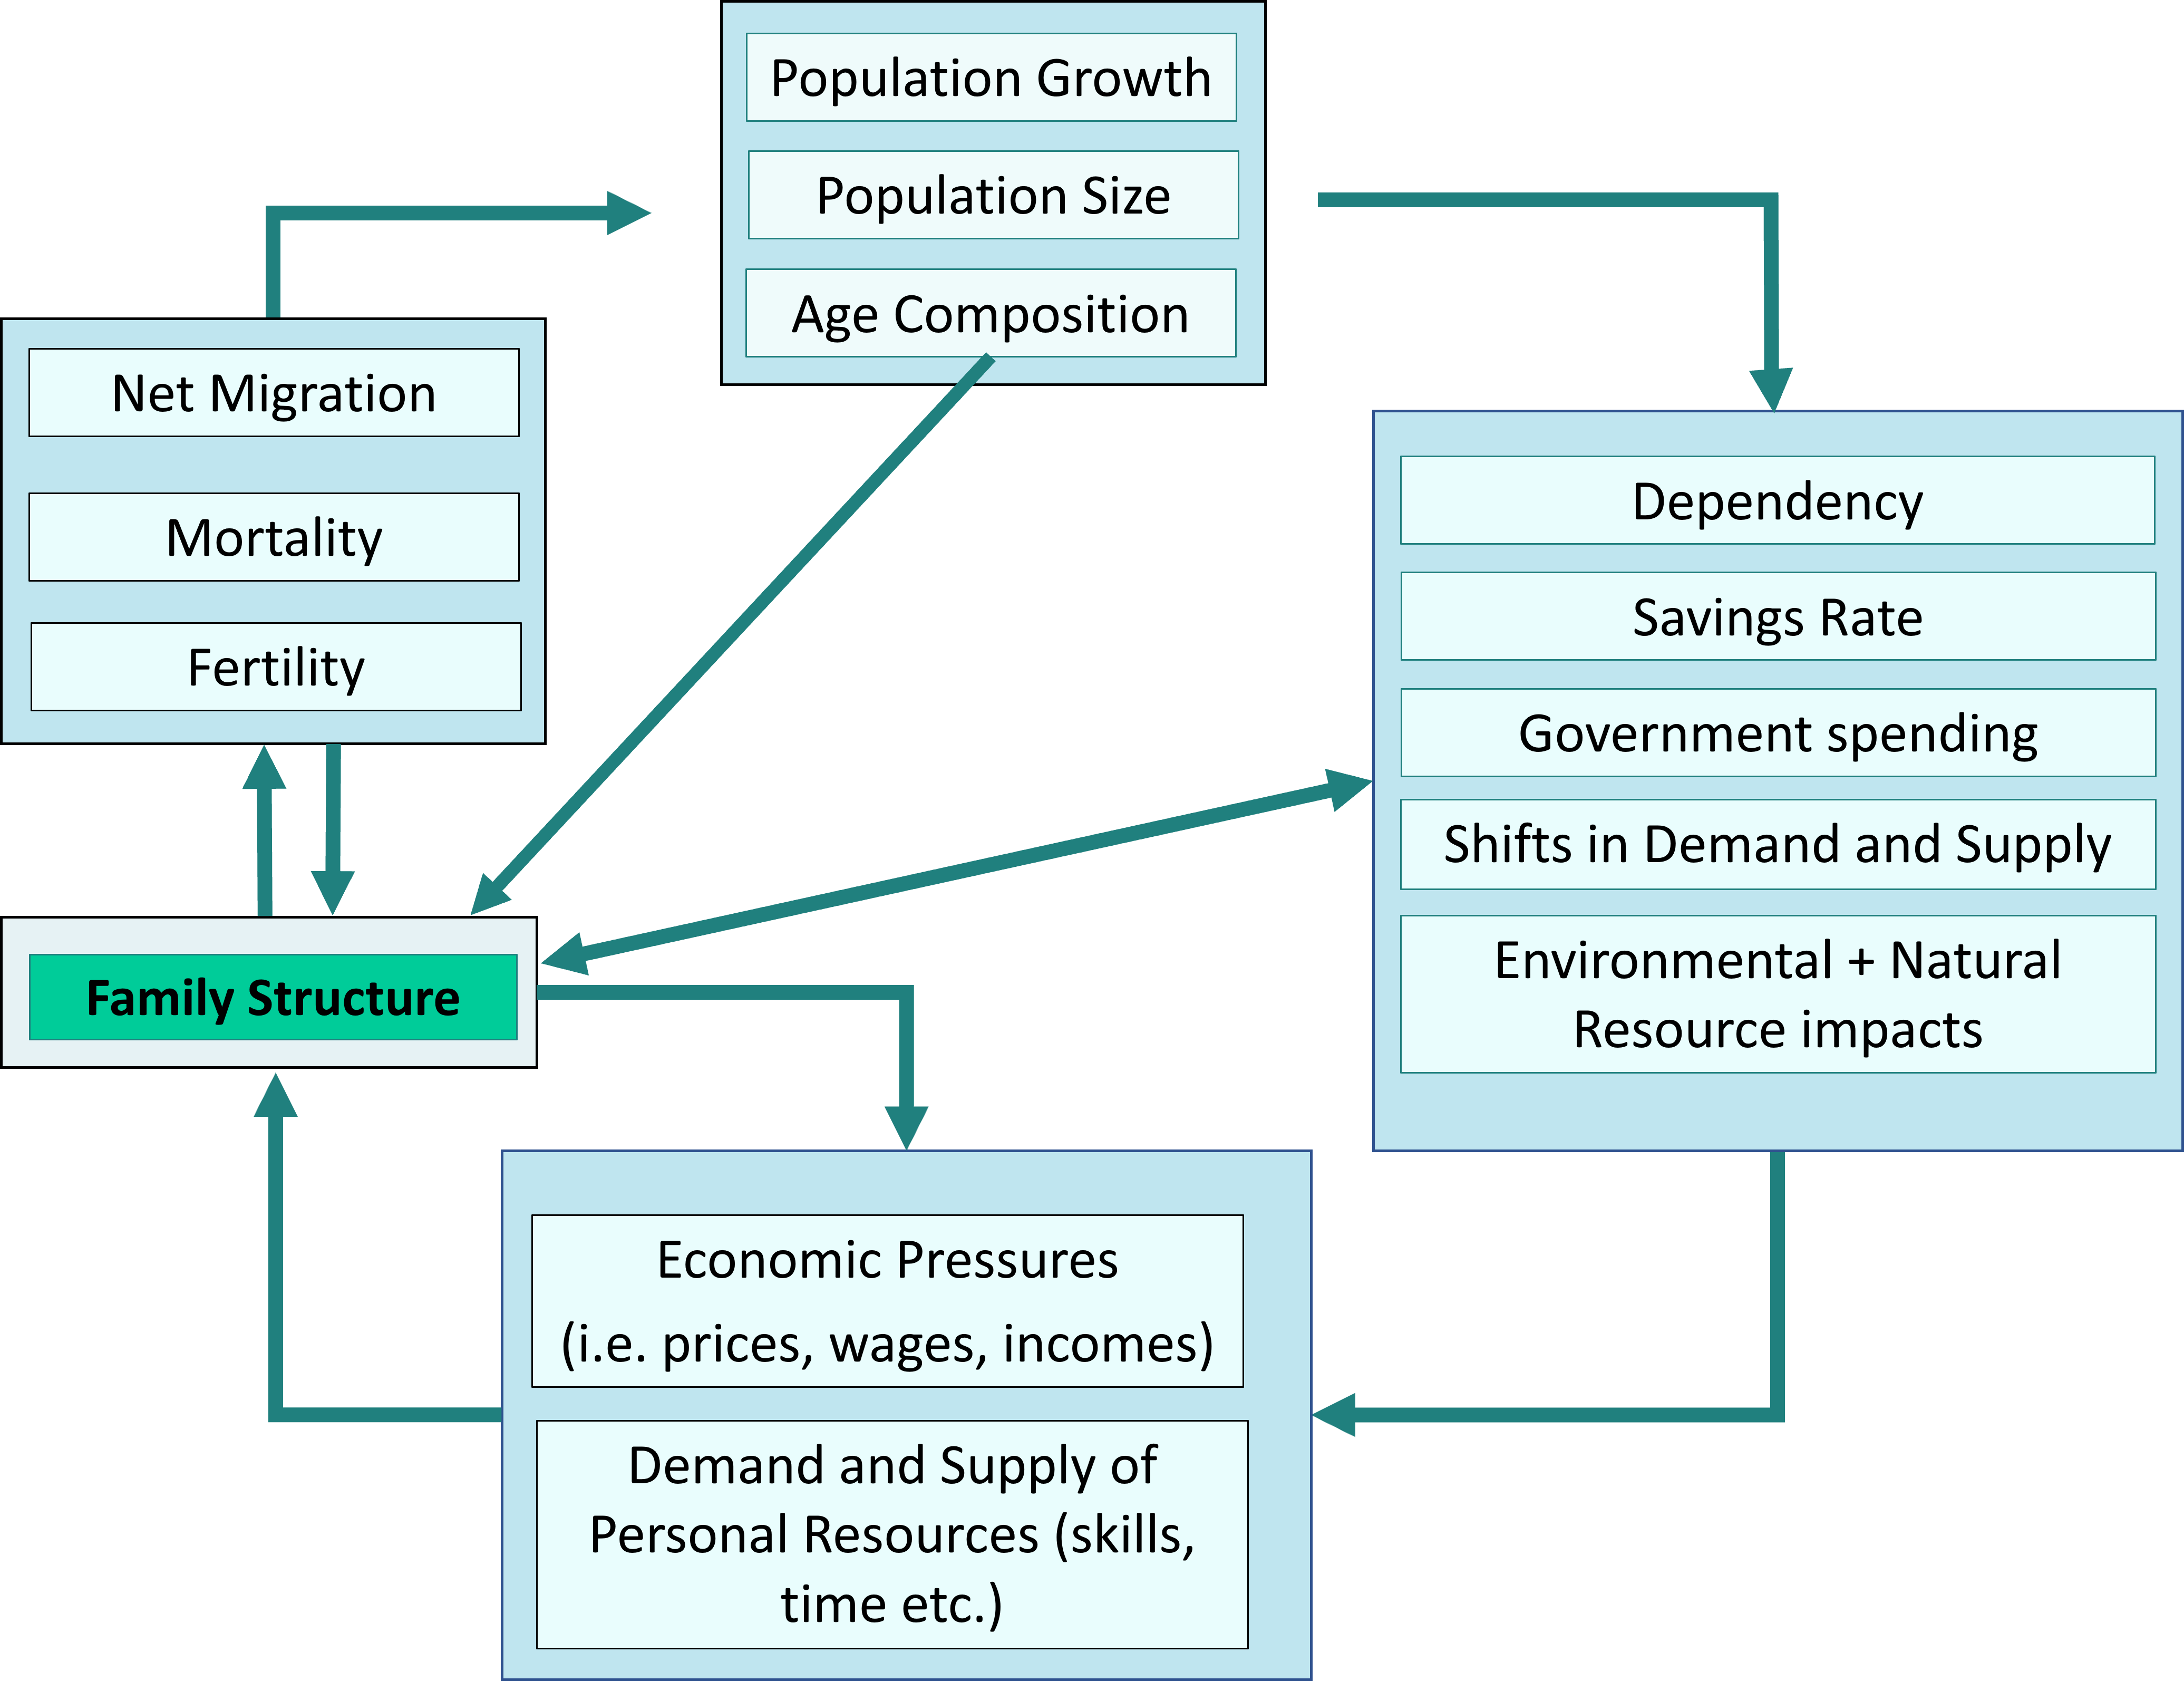 This diagram is like Figure 1-1, but there are some differences. Instead of "Real Income" at six o'clock, there are two items: "Economic Pressures (i.e. prices, wages, incomes)" and "Demand and Supply of Personal Resources (skills, time etc.)". The arrow that leads from these two items in a clockwise direction ends up at a shape called "Family Structure", at about eight o'clock. There is an arrow leading back from Family Structure to the first set of shapes at six o'clock. From Family Structure there is an arrow leading to the set of three shapes Fertility, Mortality, and Net Migration, now positioned at ten o'clock, and an arrow also leads back from these three shapes to Family Structure. As usual there is an arrow from Fertility, Mortality, and Net Migration to Population Growth, Population Size, and Age Composition at twelve o'clock, and an arrow leading from them to Dependency, Savings Rate, Government Spending, Shifts in Demand and Supply, and Environment/Natural Resource Impacts at three o'clock, and as usual there is an arrow between that set and where we began at six o'clock with Economic Pressures and Demand and Supply of Personal Resources. There is now an arrow from "Age Composition" to Family Structure. There is also a two-headed arrow between Family Structure and the shapes at three o'clock, indicating their mutual influence.